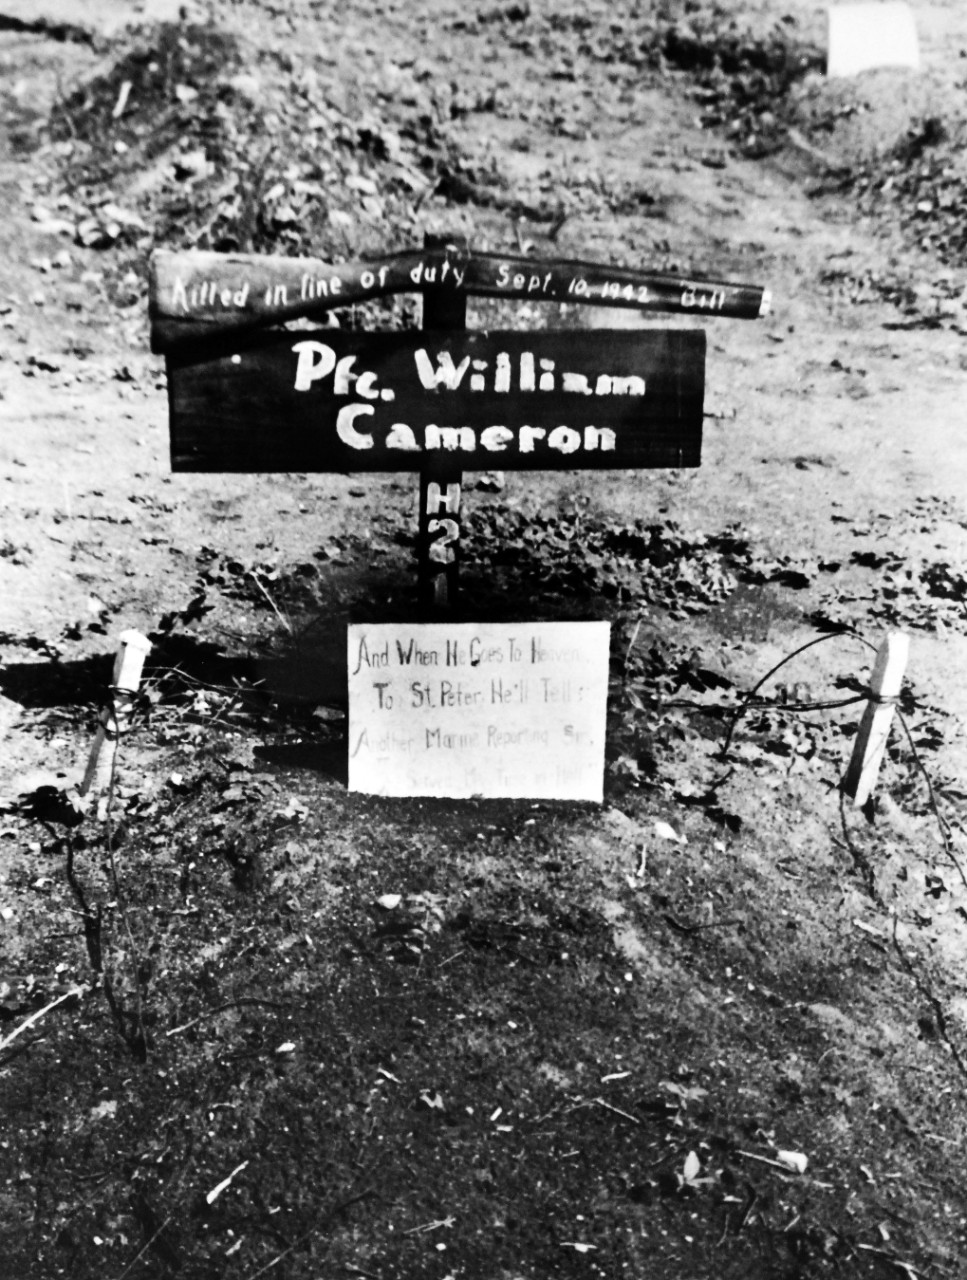 LC-Lot-801-37:  Guadalcanal Campaign, August 1942 – February 1943. Marine Grave in Guadalcanal.  The grave of Marine Private William Cameron, killed in the line of duty, September 10, 1942, in the First Marine Division Cemetery, Guadalcanal.  Epitaph placed by his comrades reads, “And when he goes to Heaven / St. Peter he will tell / Another Marine reporting, Sir / I’ve served my time in Hell!”   U.S. Marine Corps Photograph.  Photographed through Mylar sleeve. Courtesy of the Library of Congress. (2015/11/06).